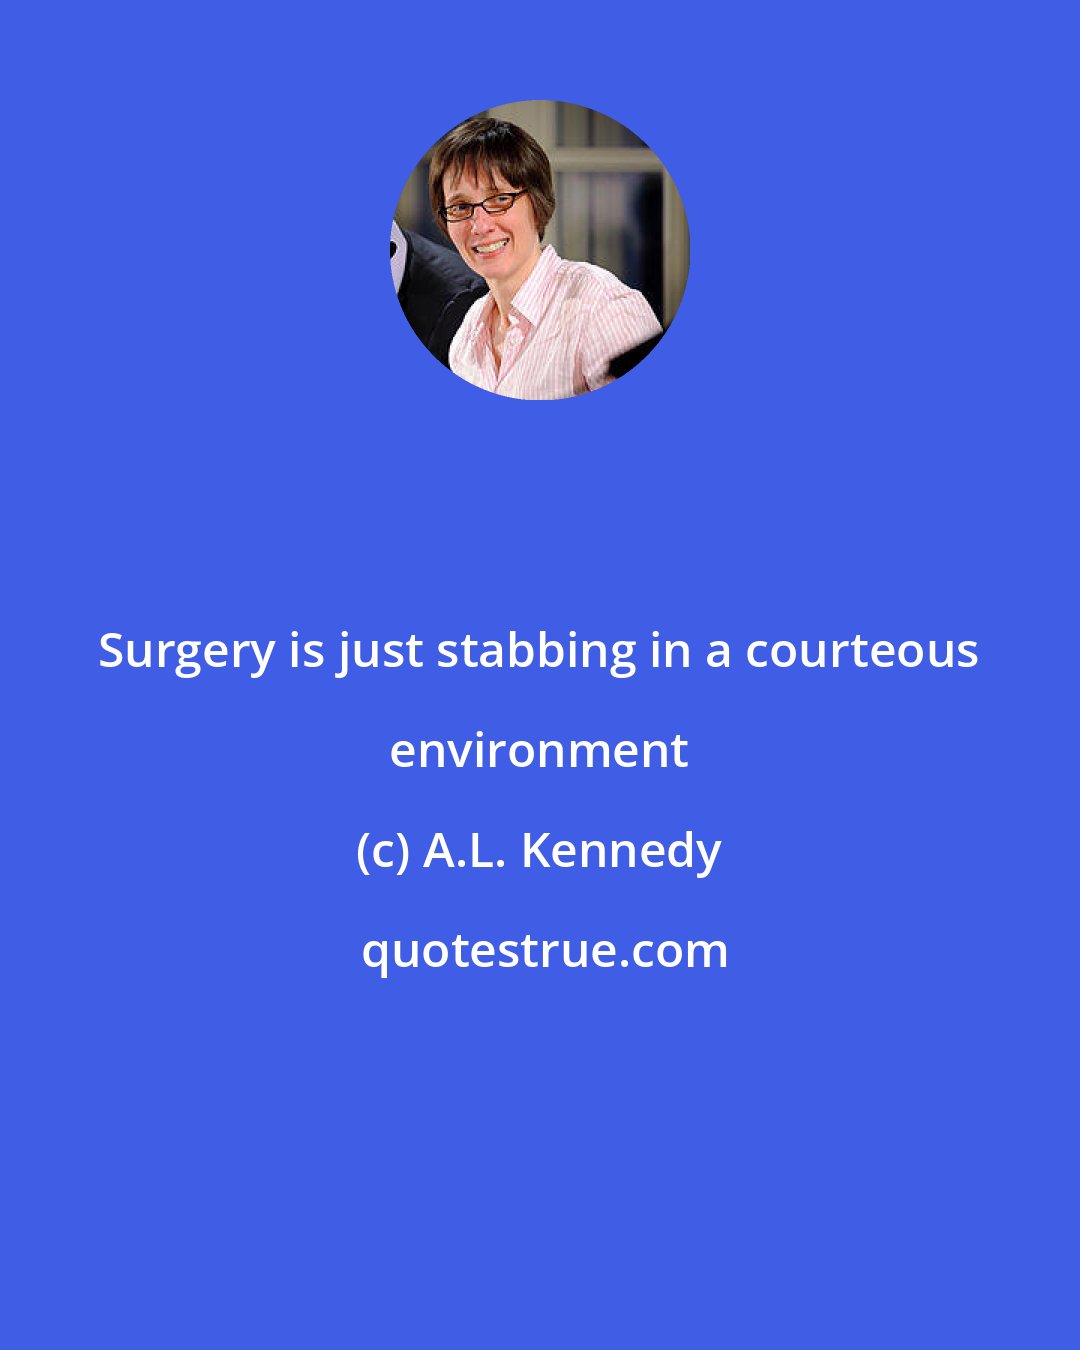 A.L. Kennedy: Surgery is just stabbing in a courteous environment